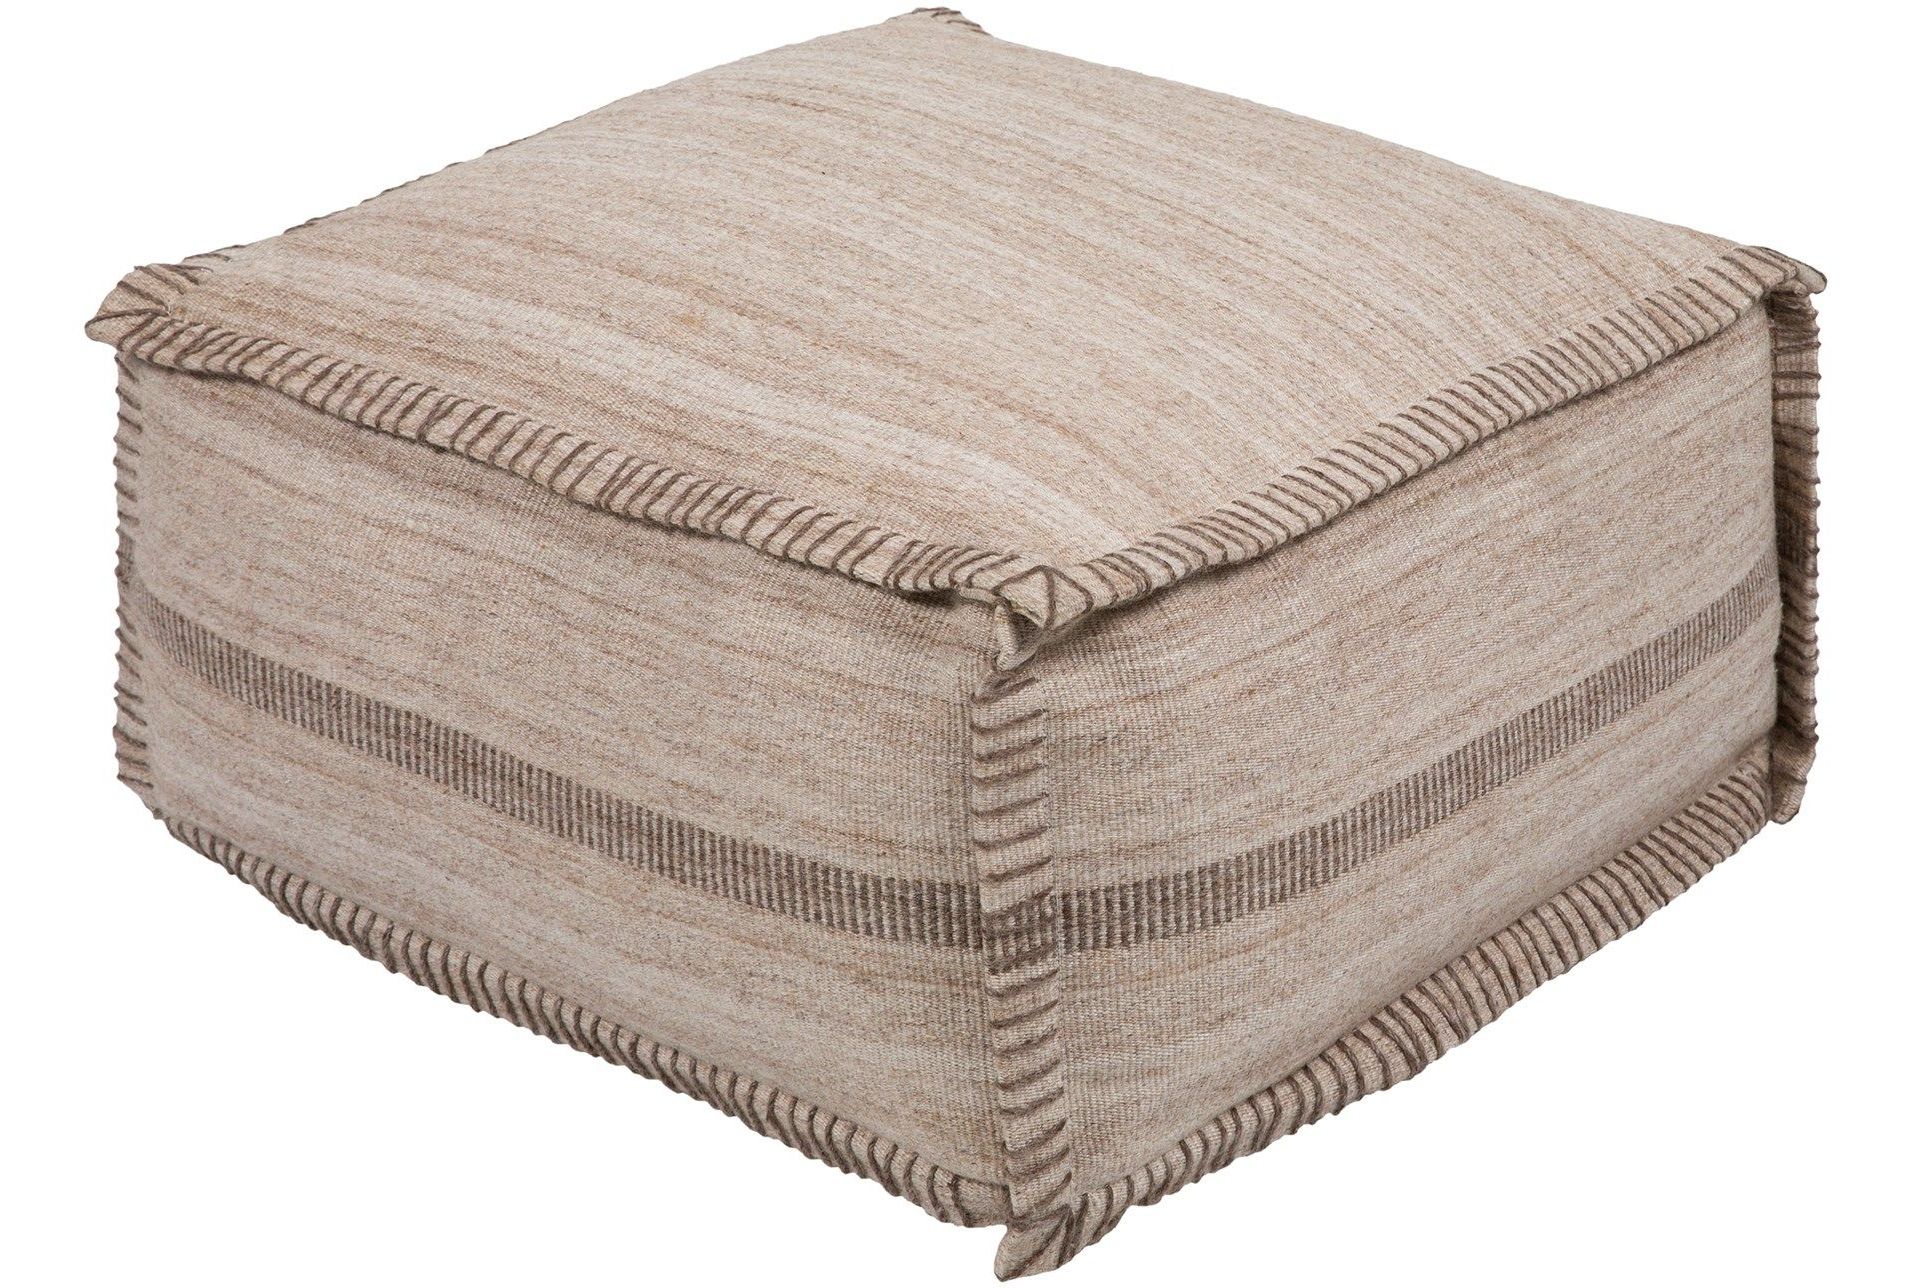 Brown Pouf, Pouf, Ottoman Intended For Recent Natural Beige And White Cylinder Pouf Ottomans (View 10 of 10)